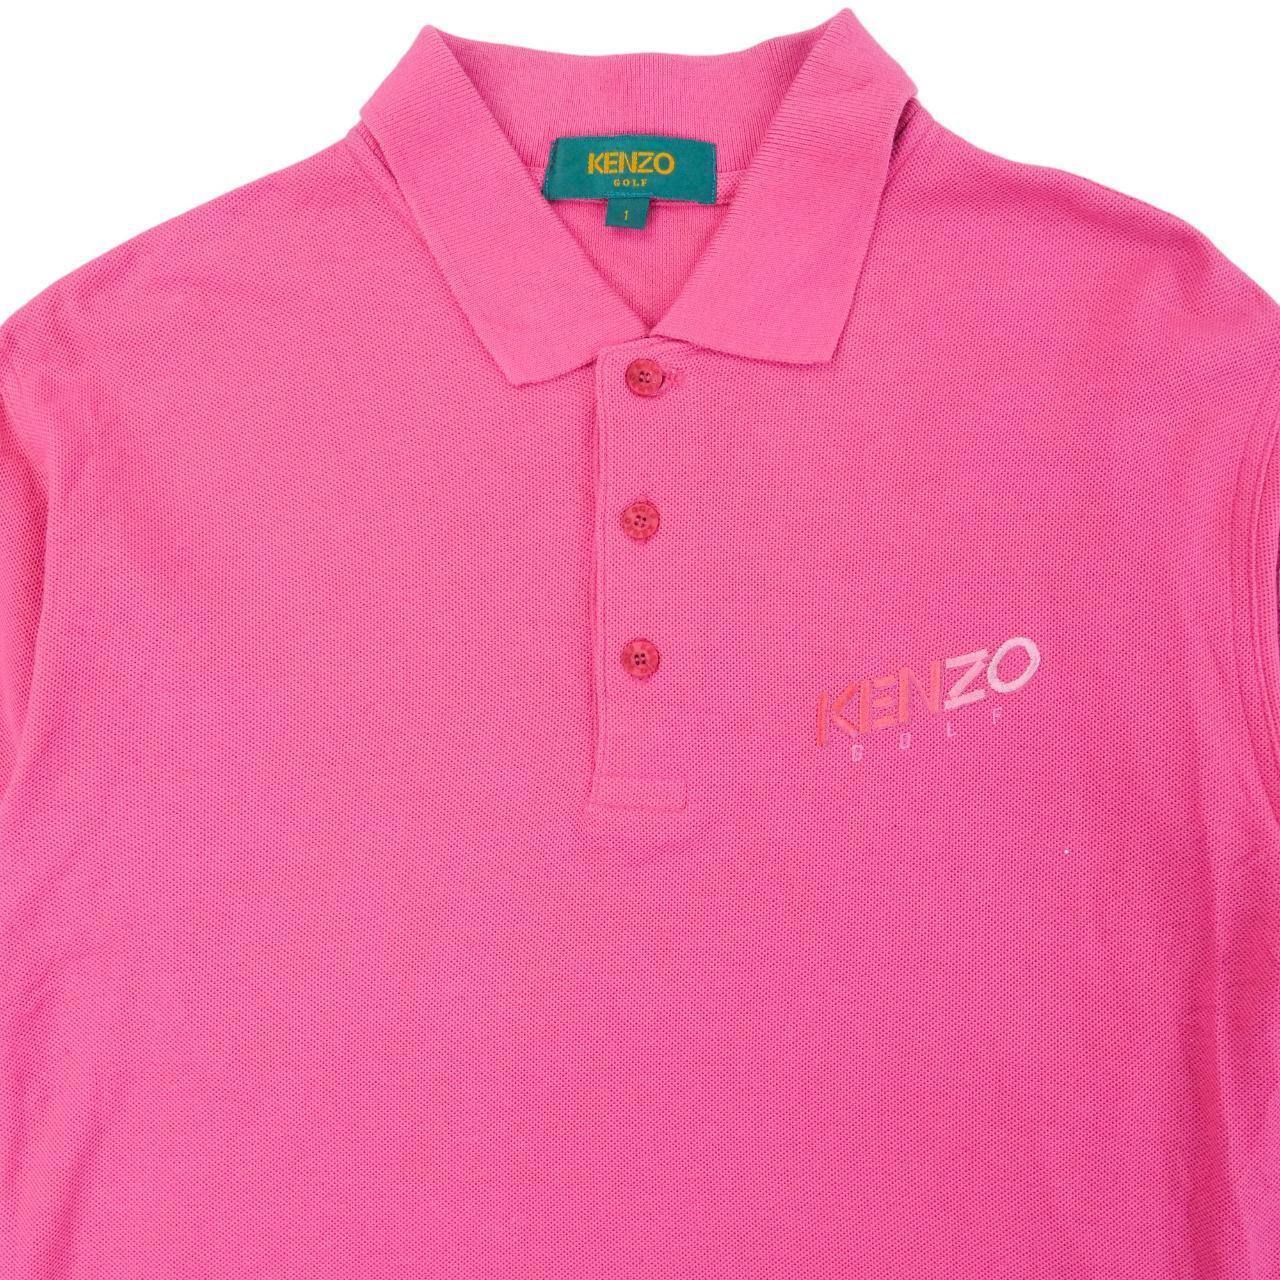 Vintage Kenzo Long Sleeve Polo Shirt Size XS - Known Source